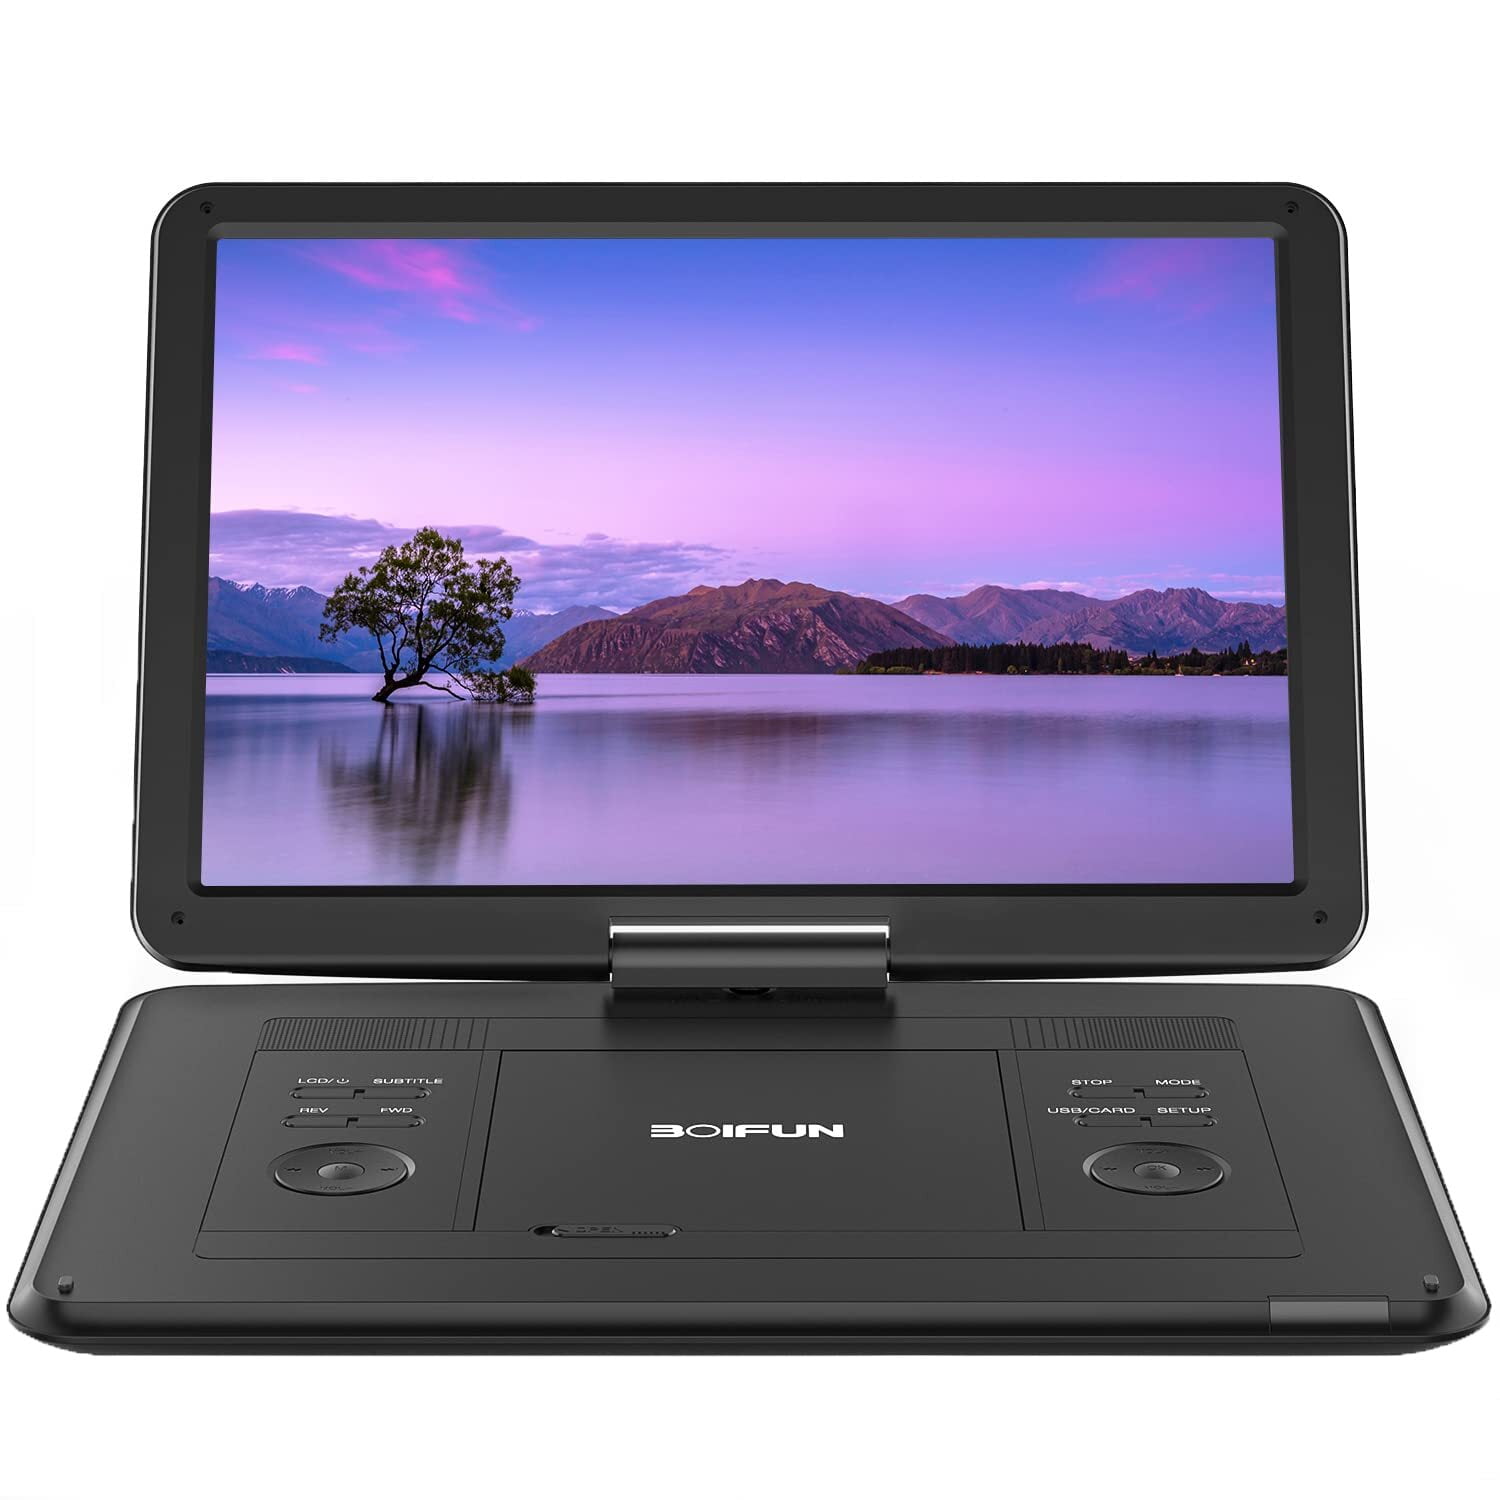  Arafuna 15.9 Portable DVD Player for Car, 14.5 HD Swivel  Screen with 5-Hour Rechargeable Battery, Dual Stereo Speakers, Support  USB/SD/Sync TV, Regions Free, Last Memory : Electronics